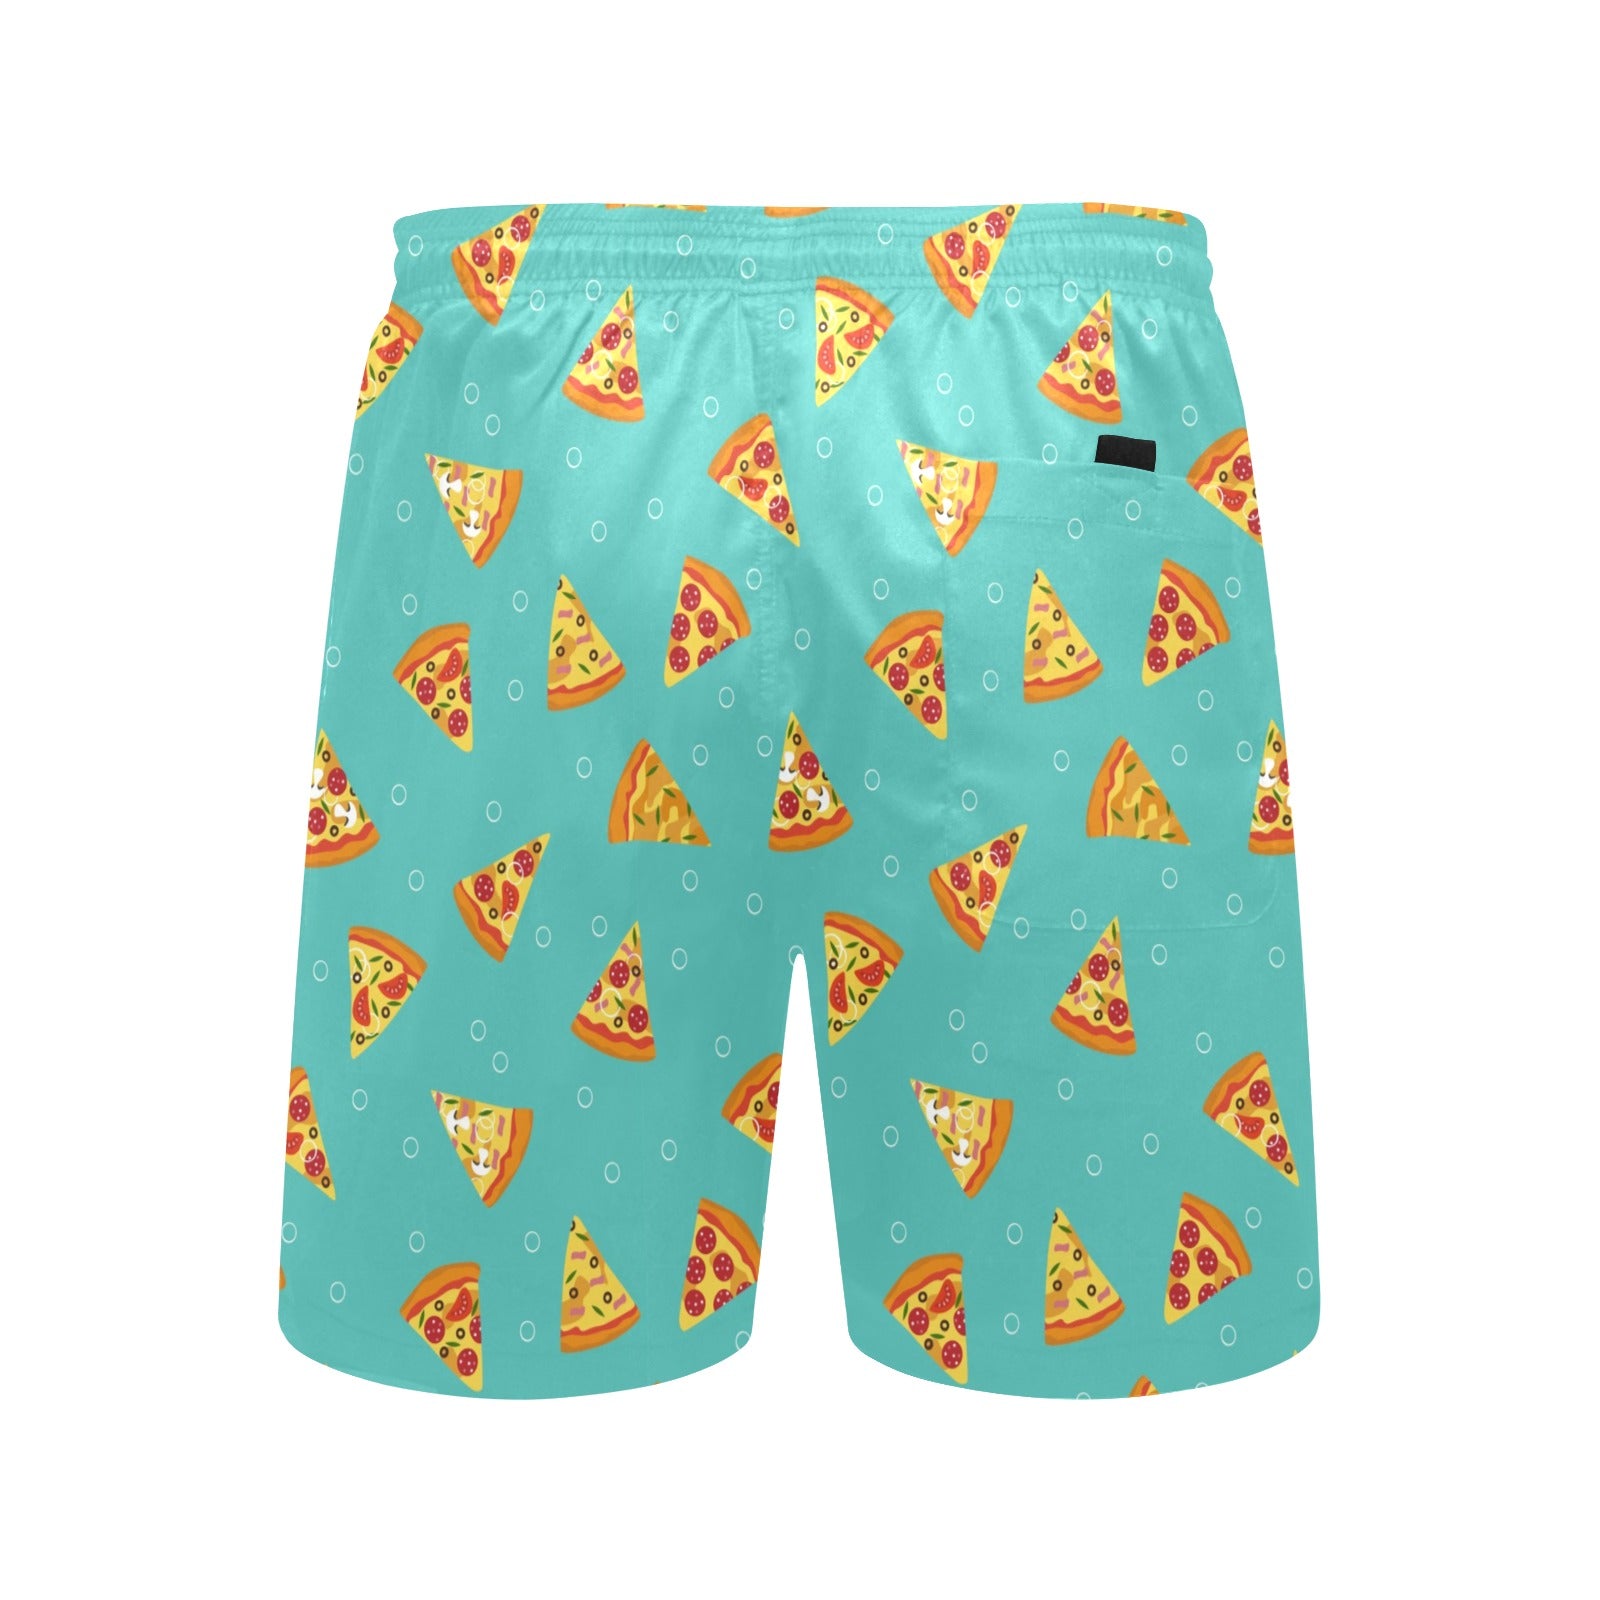 Pizza Men Mid Length Shorts, Funny Food Beach Swim Trunks Front and Back Pockets Mesh Drawstring Boys Casual Bathing Suit Summer Starcove Fashion